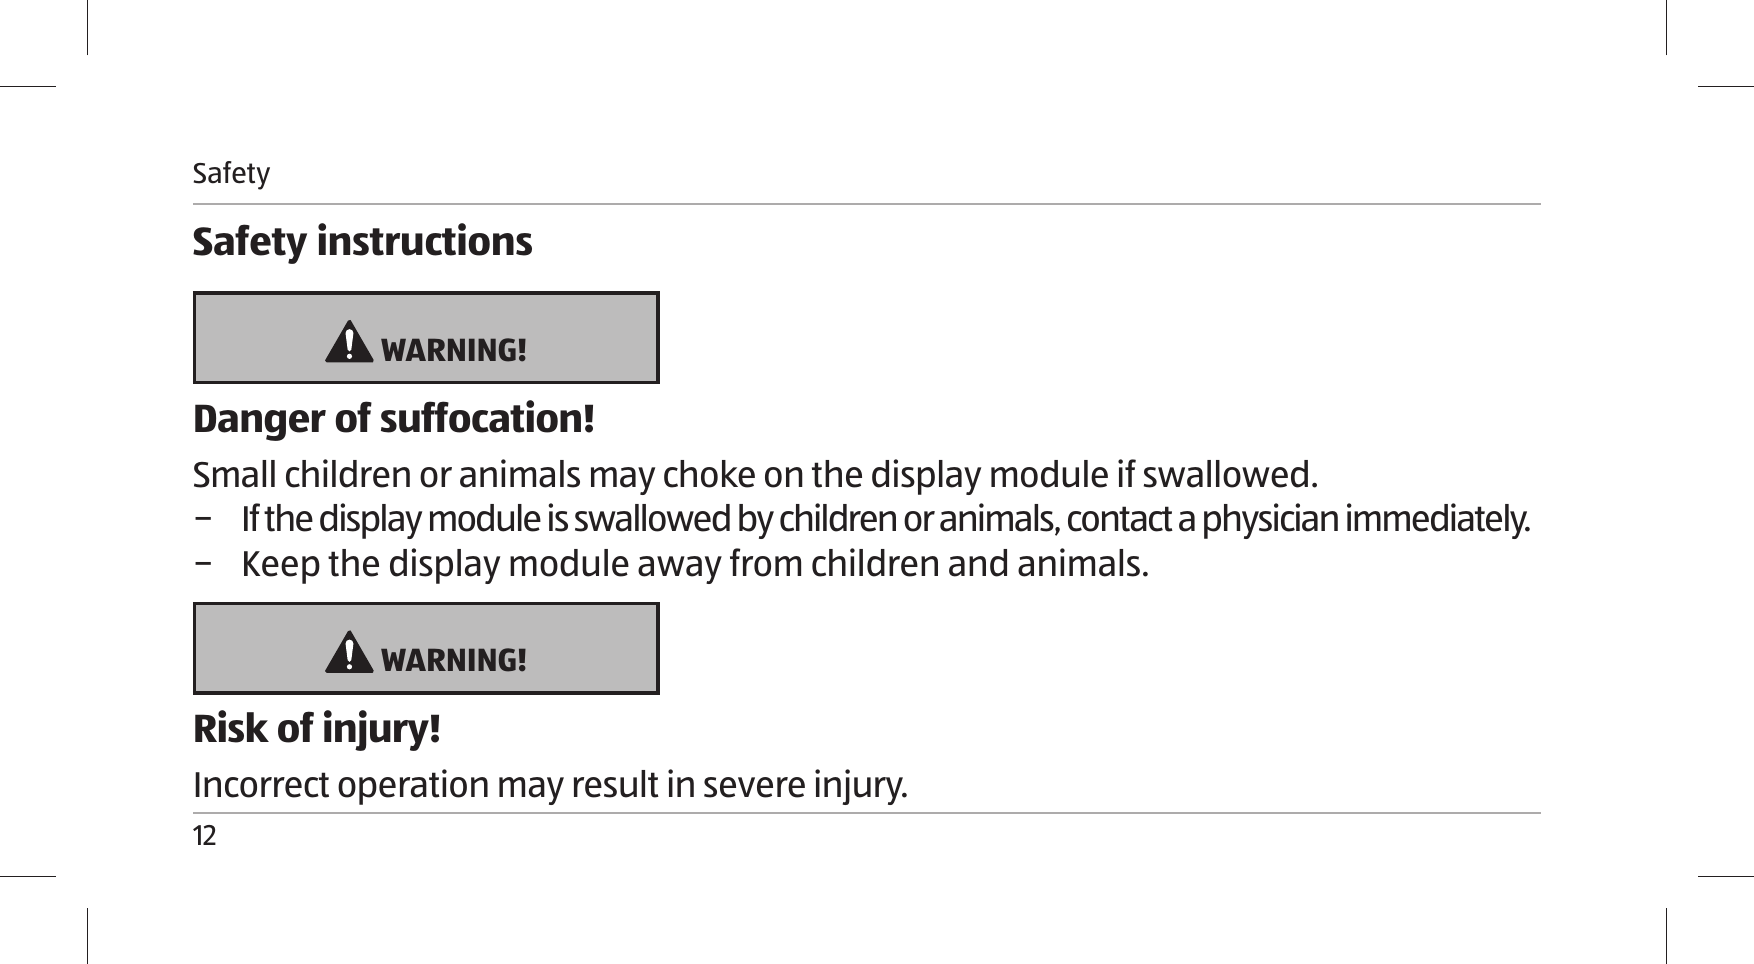 Safety12Safety instructions WARNING!Danger of suffocation!Small children or animals may choke on the display module if swallowed. − If the display module is swallowed by children or animals, contact a physician immediately. − Keep the display module away from children and animals. WARNING!Risk of injury!Incorrect operation may result in severe injury.